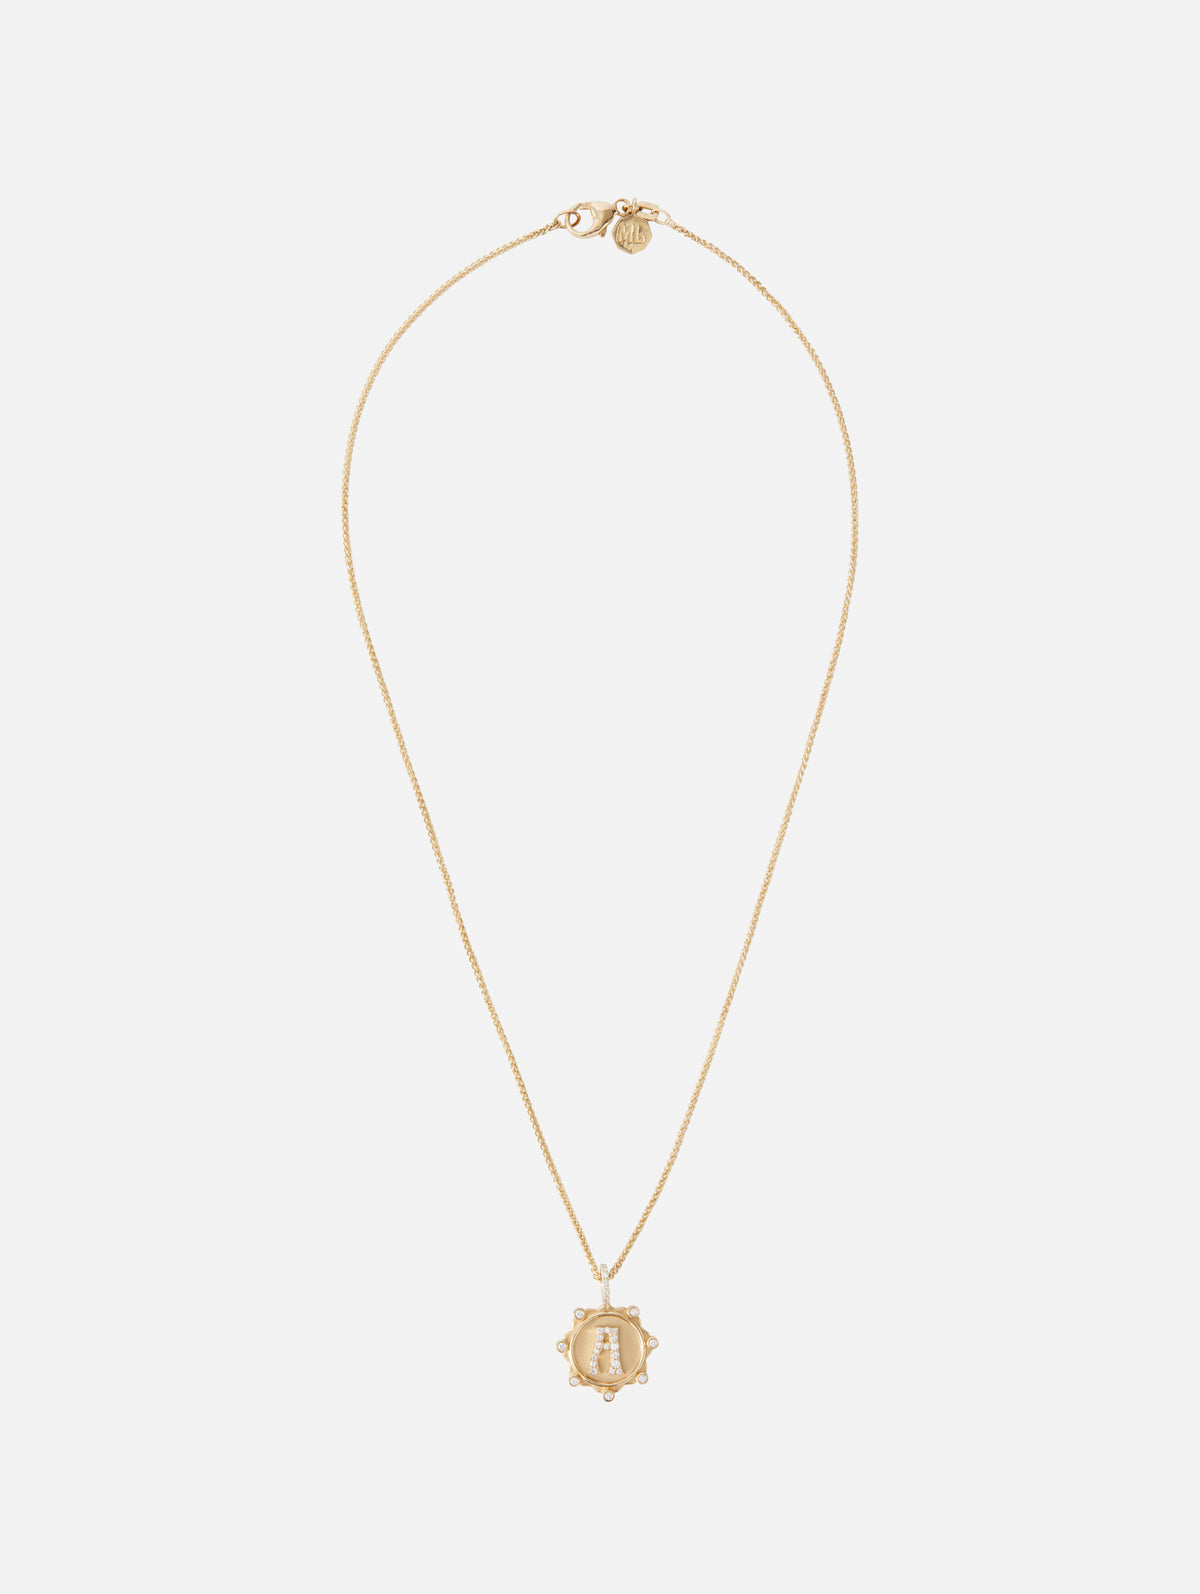 Marlo Laz Pave Initial Coin Necklace